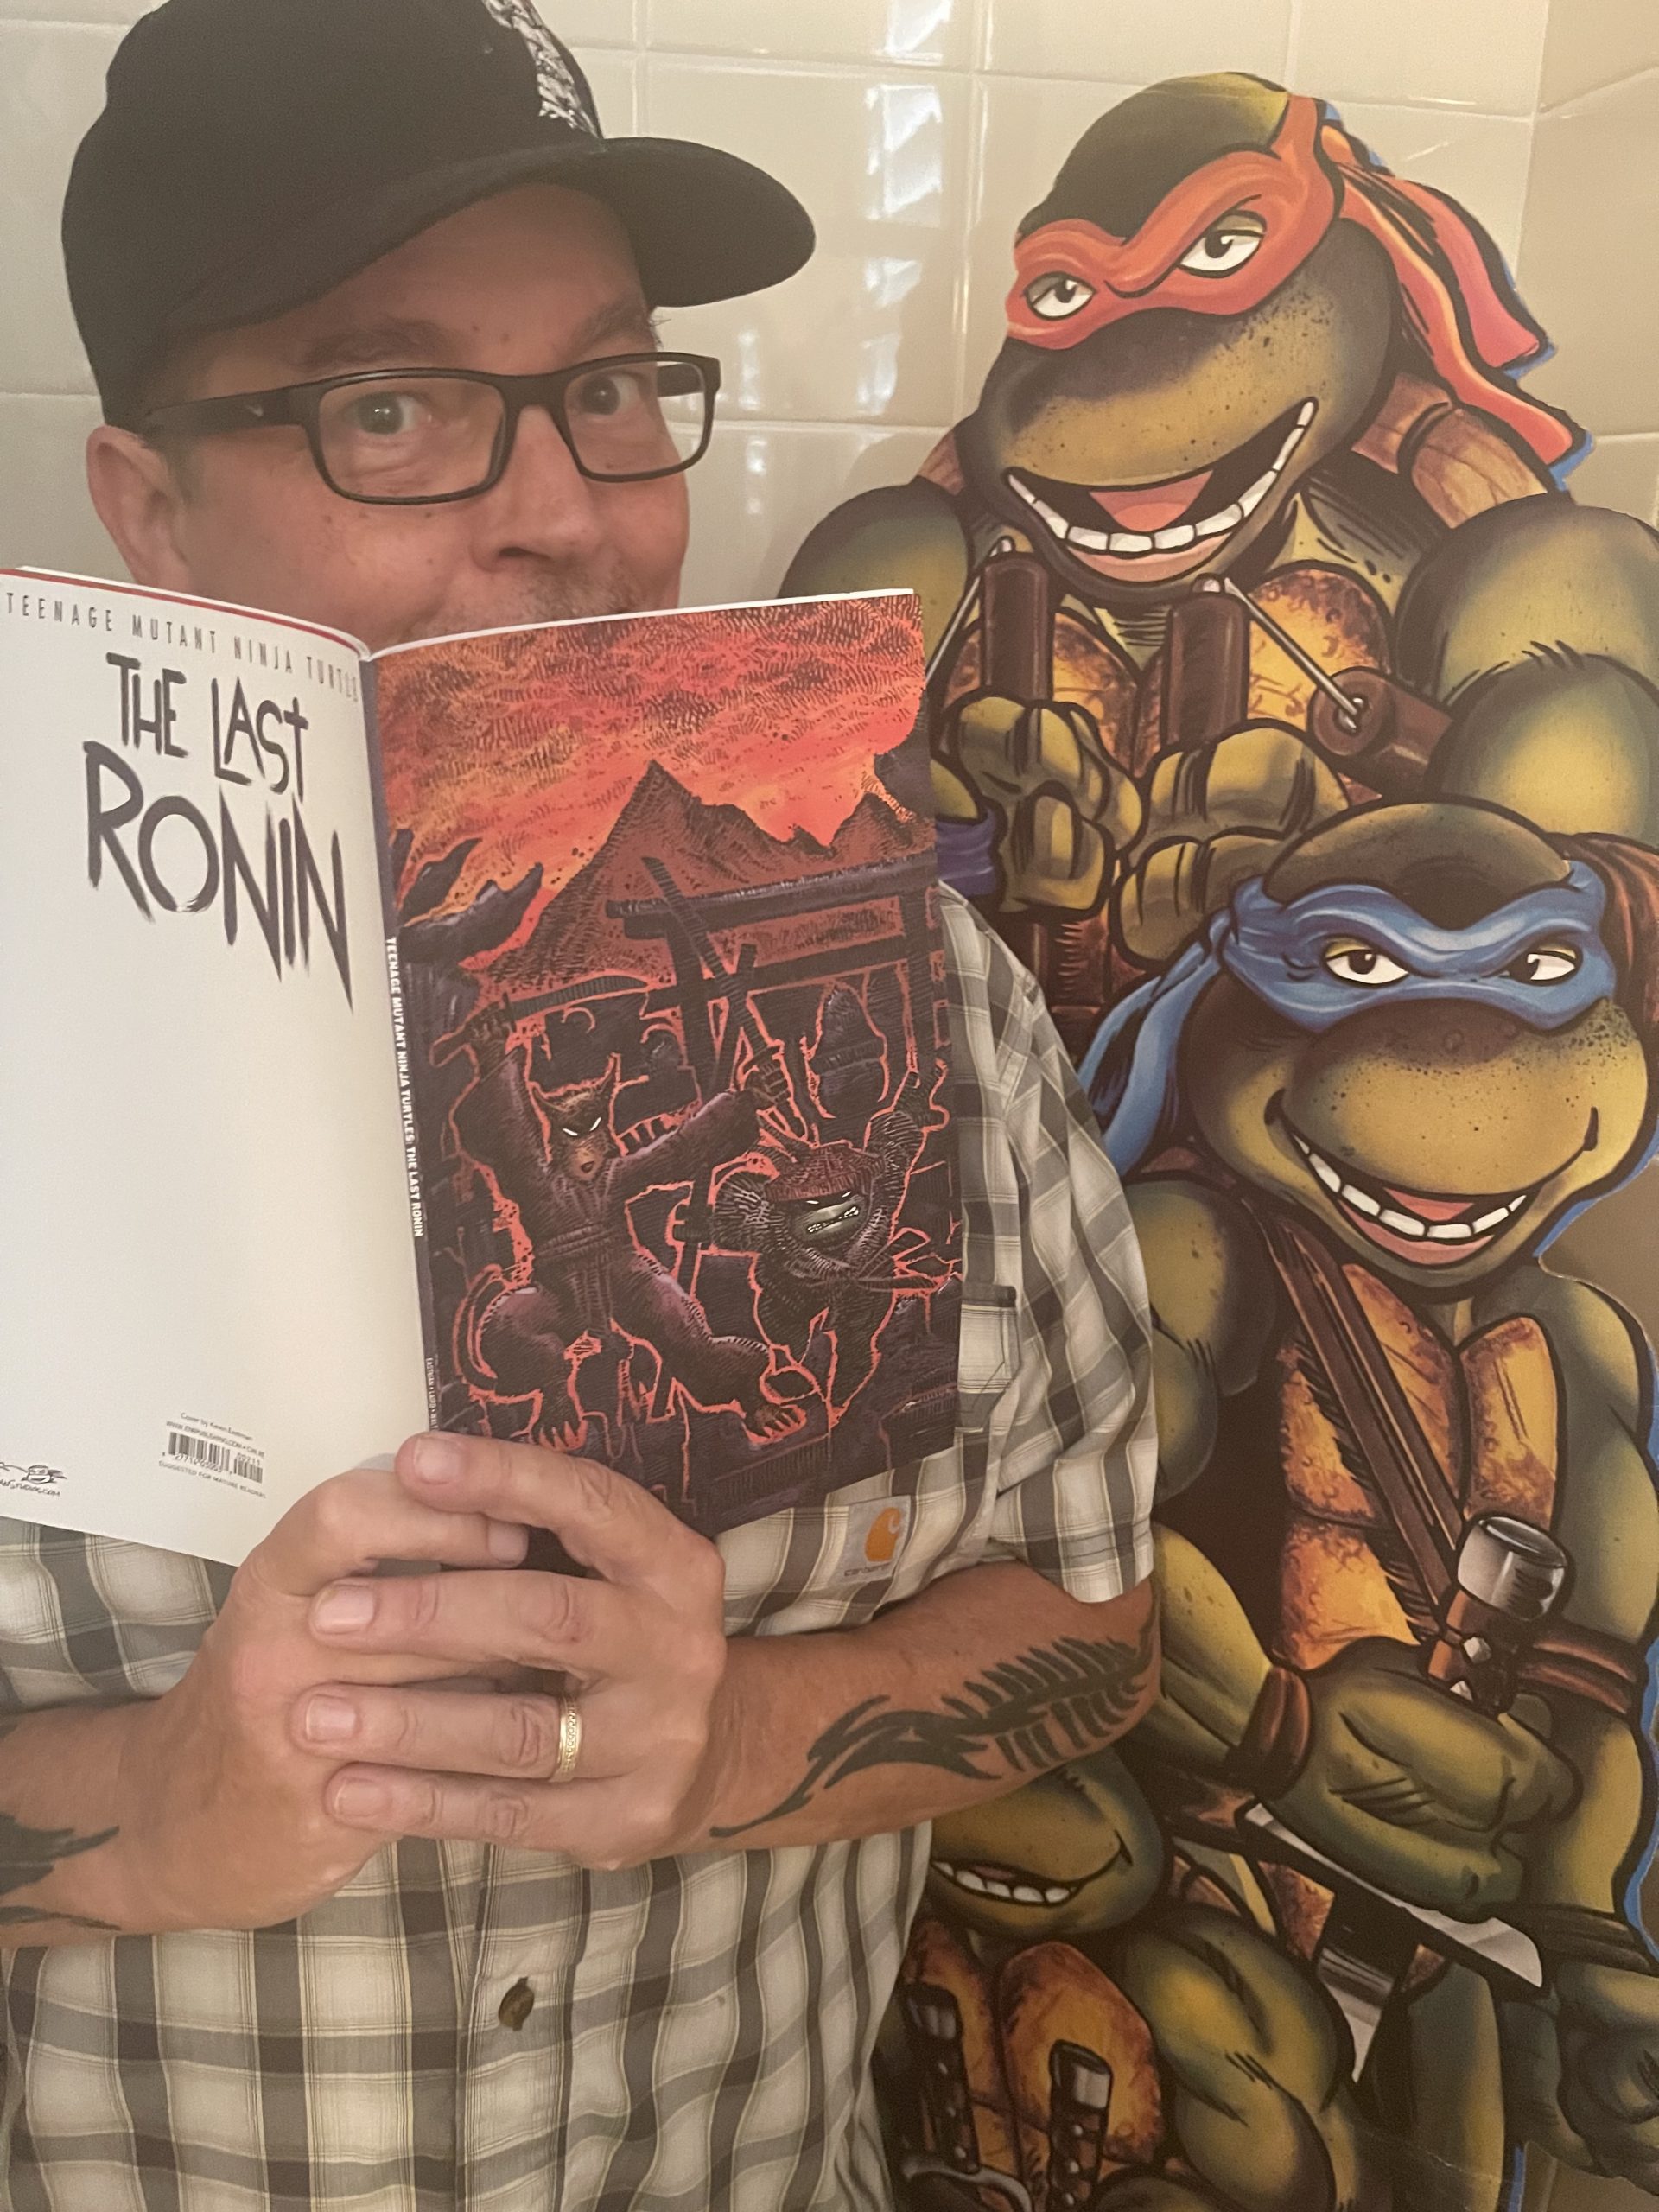 The Last Ronin issue 5, SIGNED